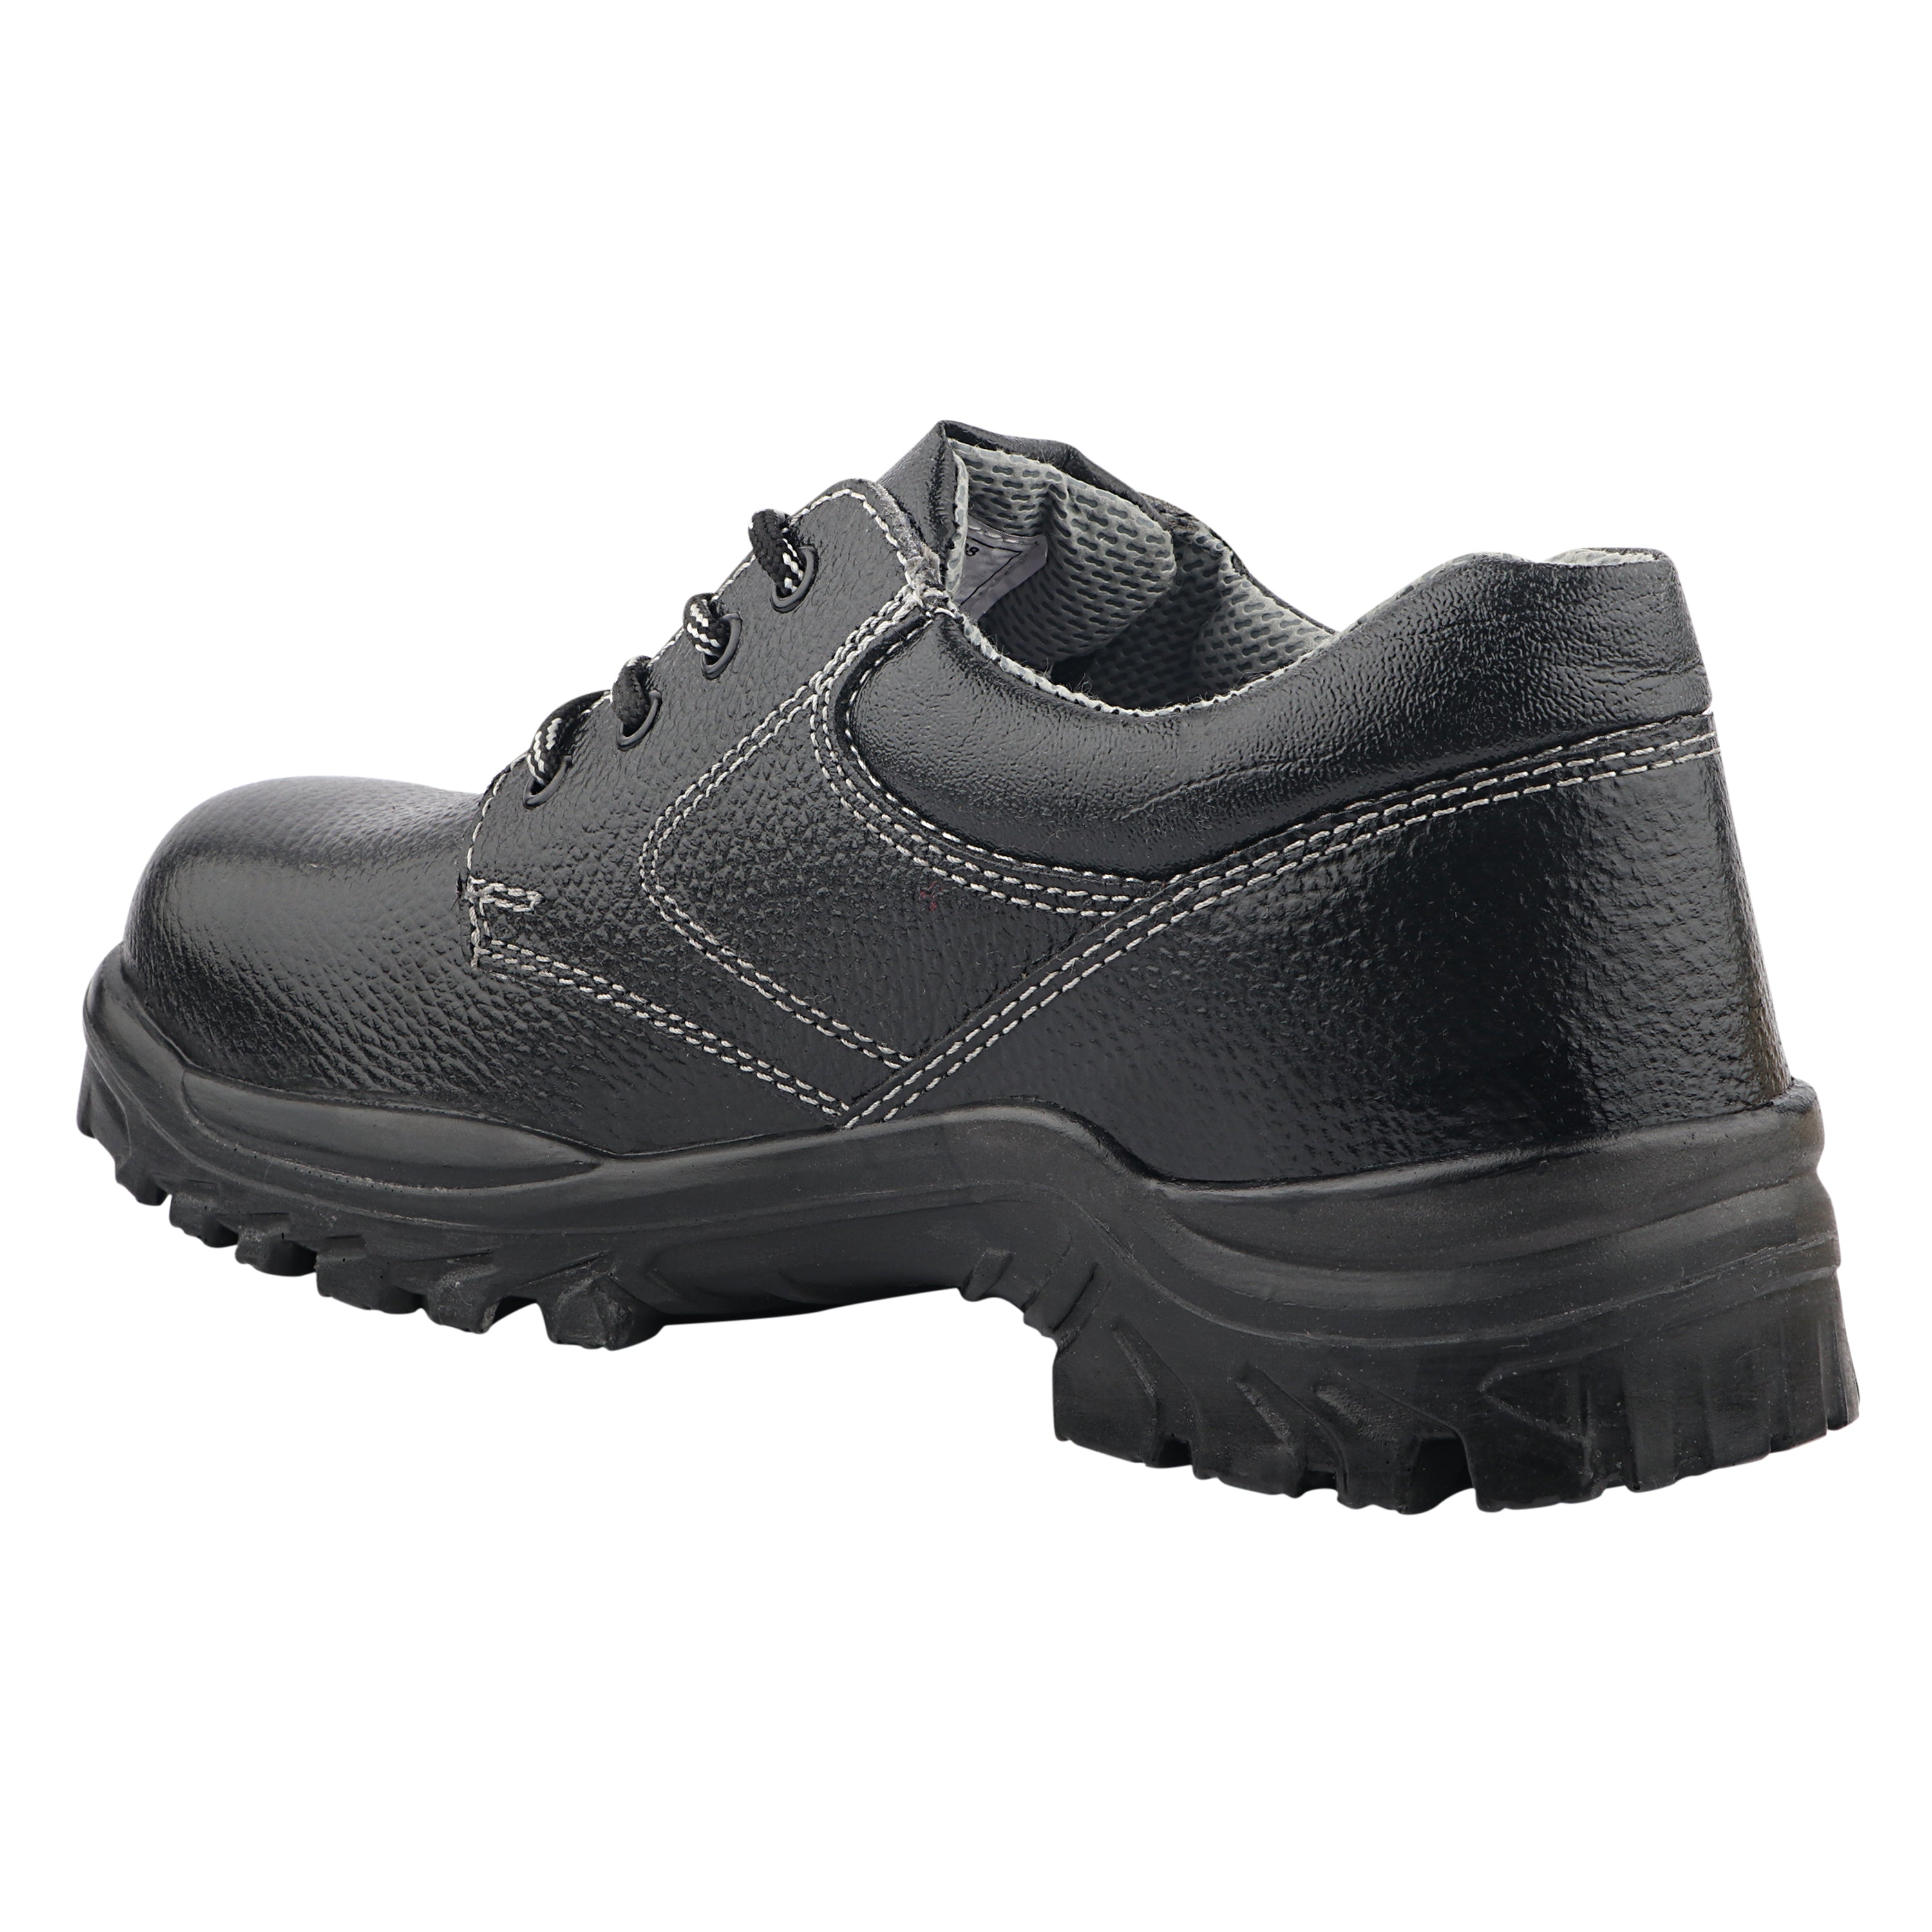 Fuel Gorilla Genuine Leather Safety Shoes for Men's Steel Toe Cap With Single Density PU Sole (Black)